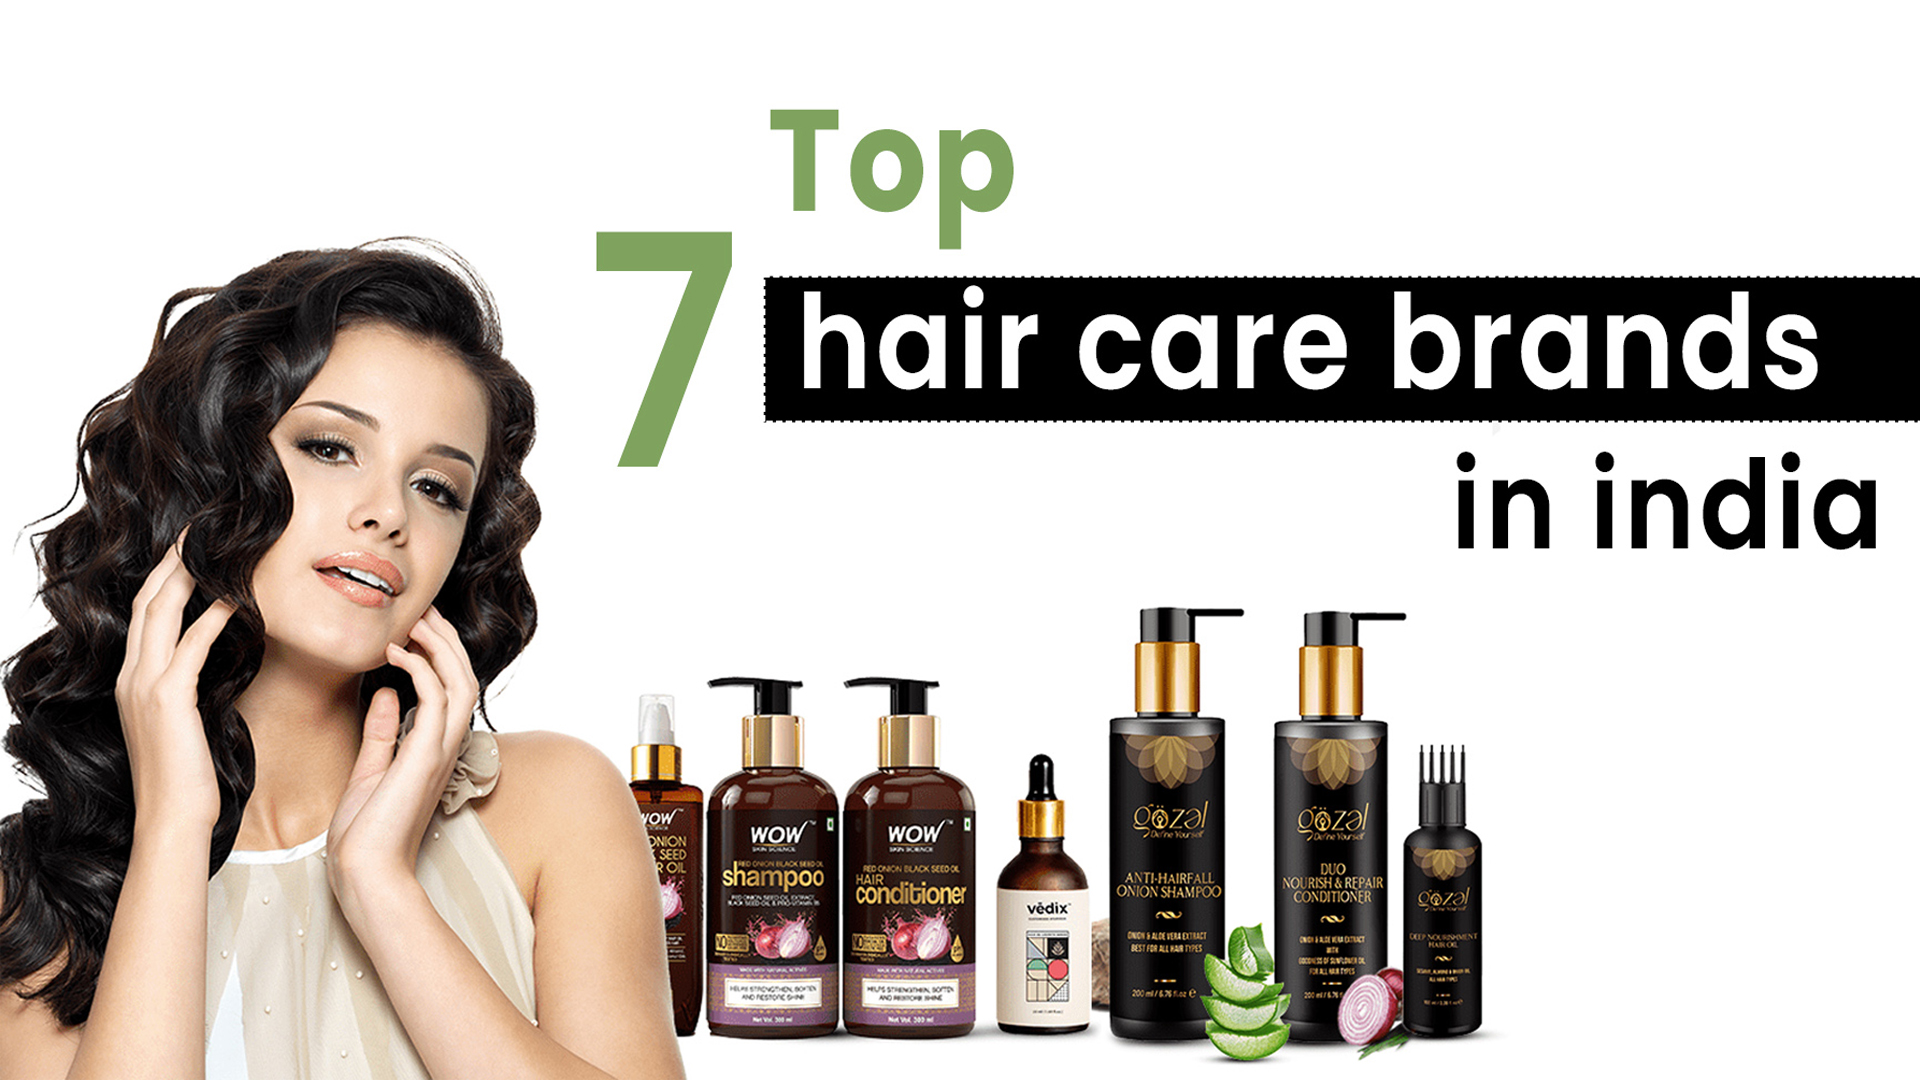 Gozel - Hair Care and Skin Care Products India